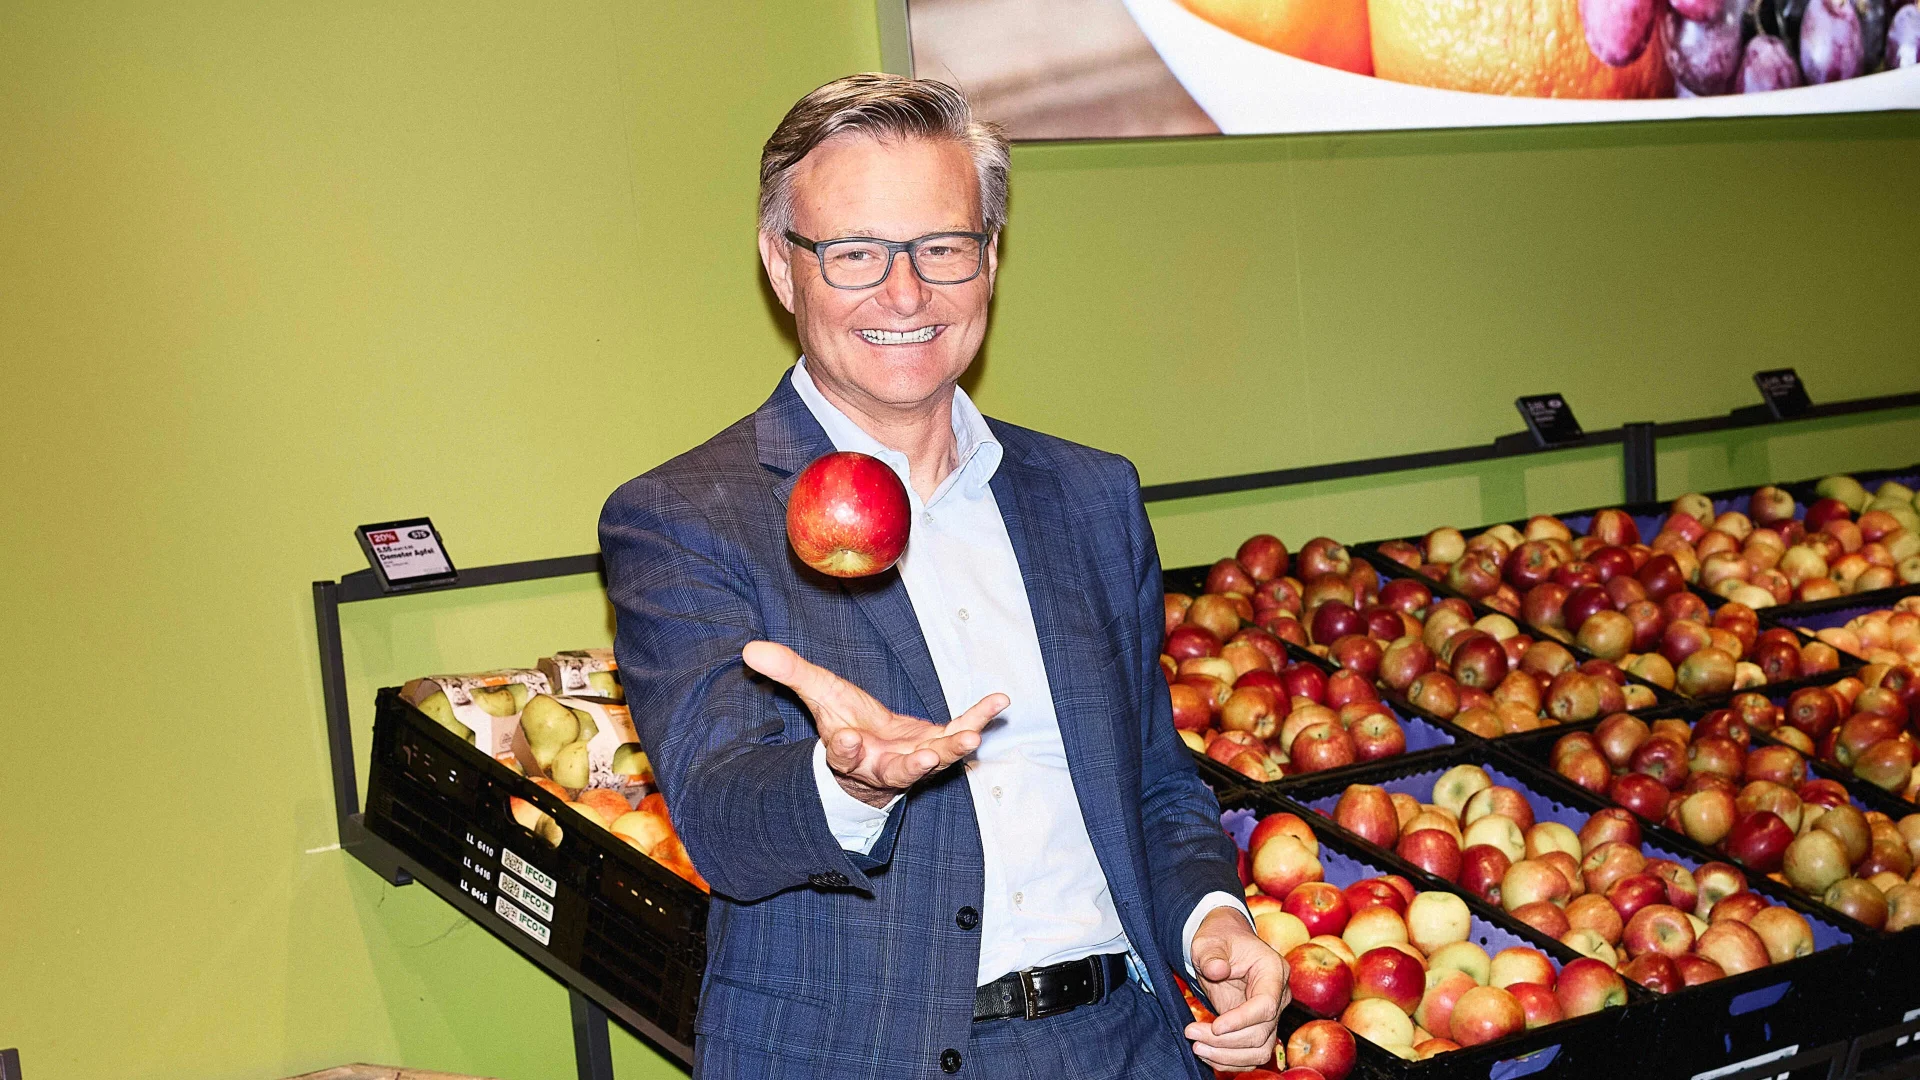 Mario Irminger in the supermarket in front of the apple display